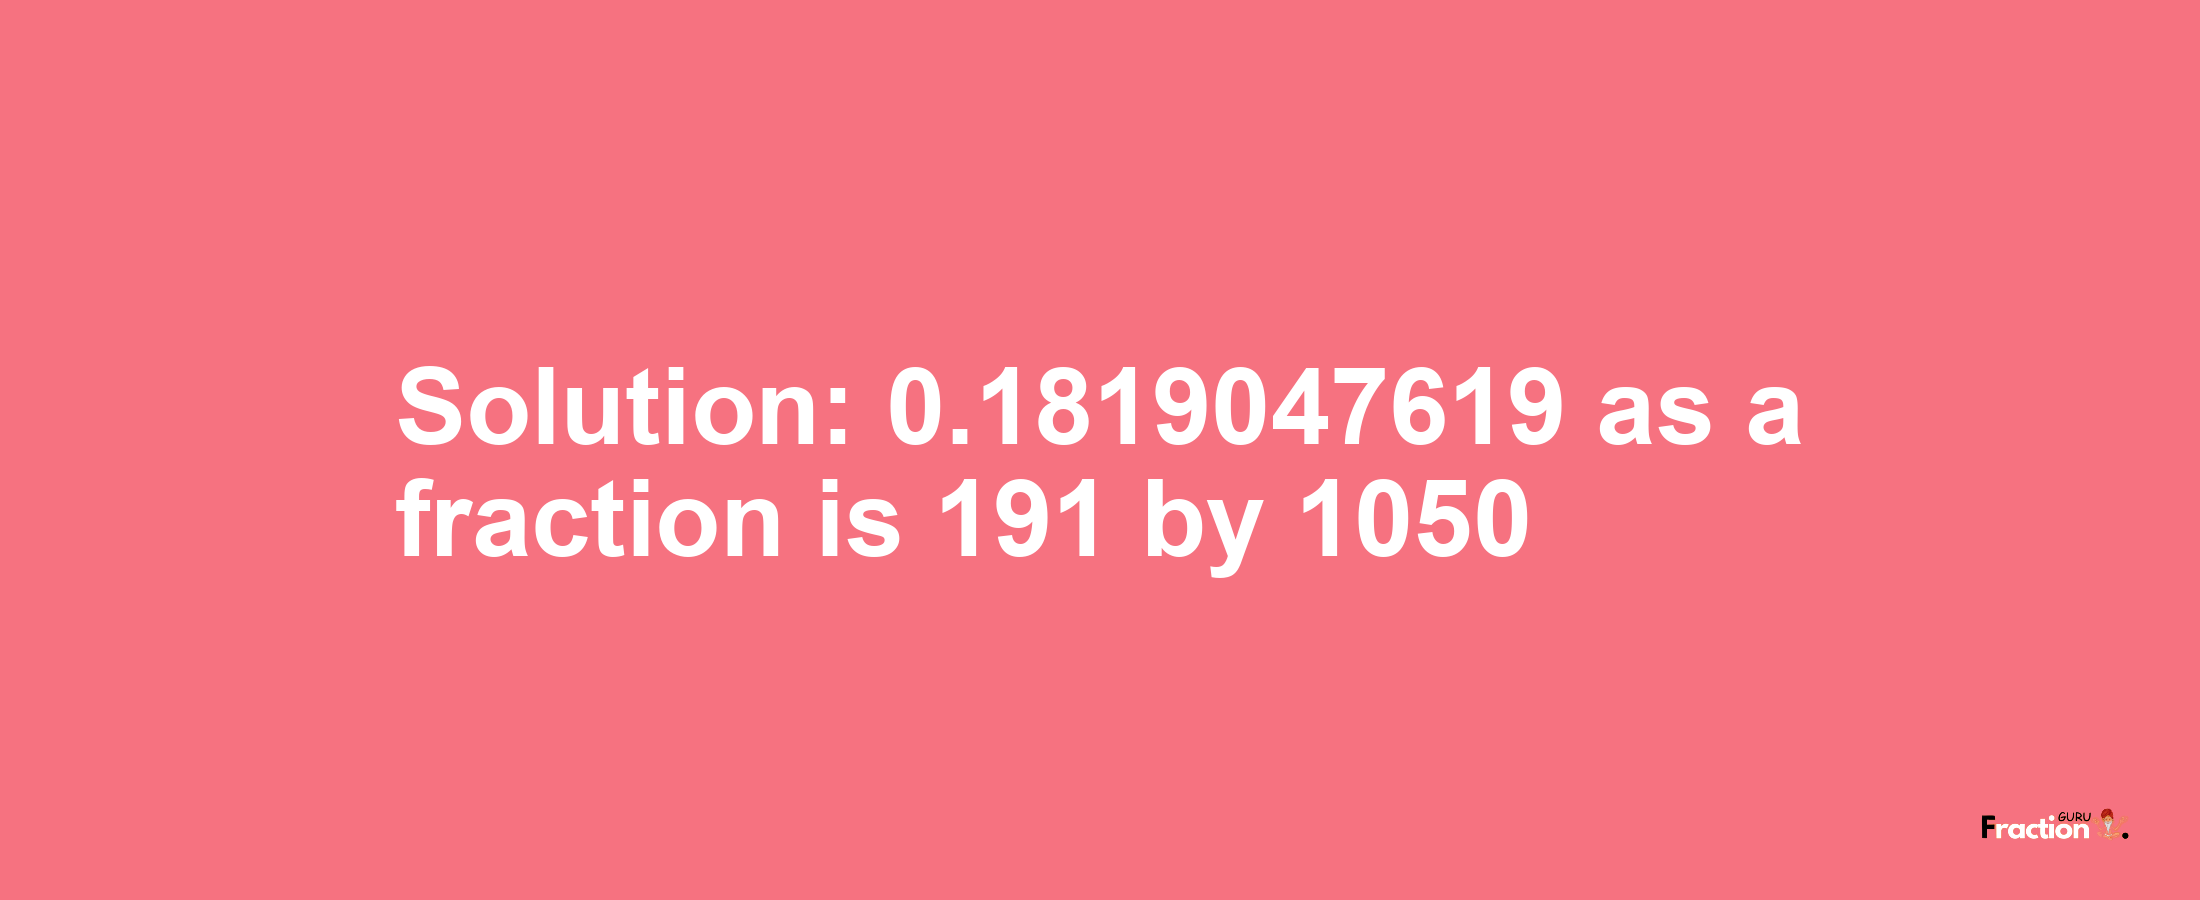 Solution:0.1819047619 as a fraction is 191/1050